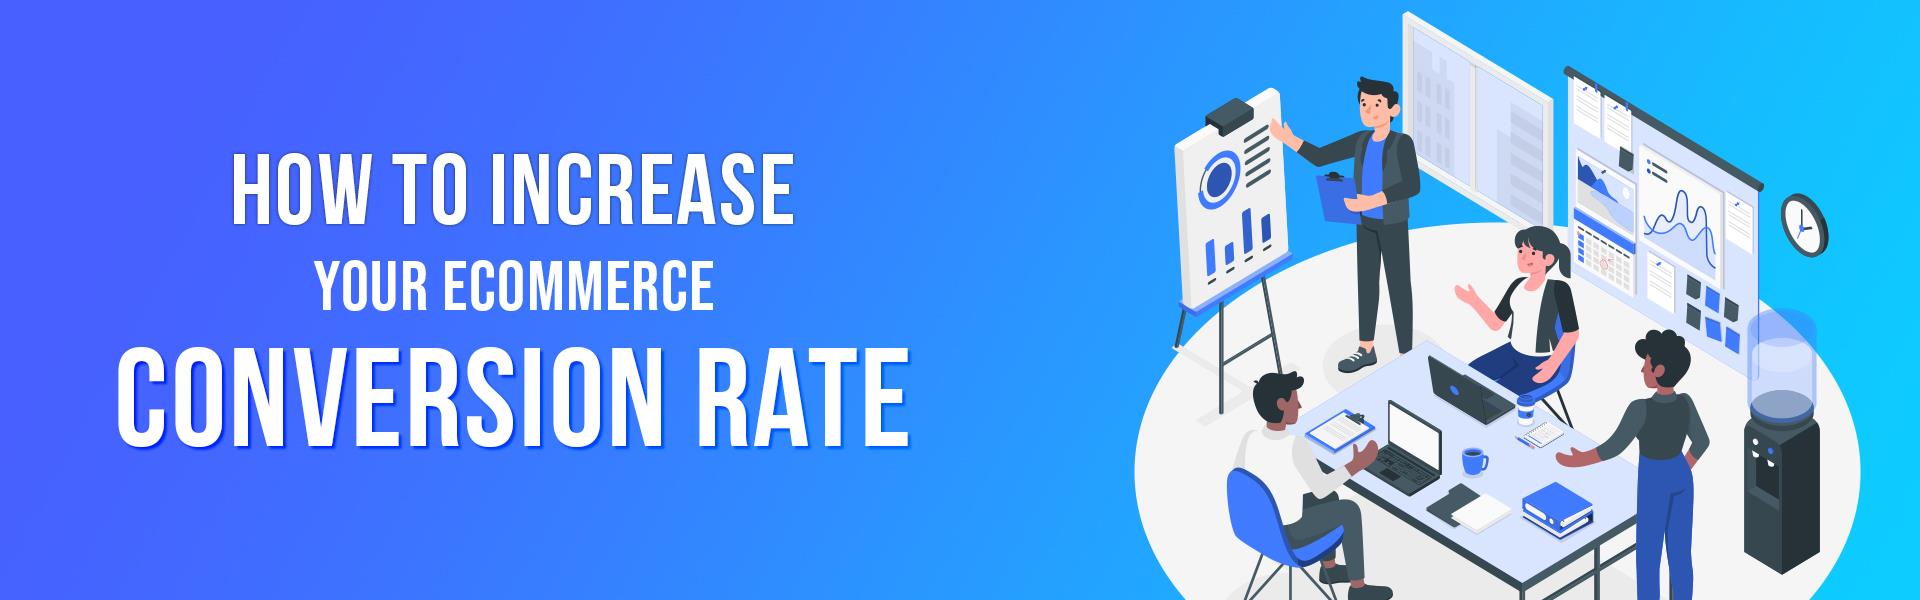 How to Increase Your Ecommerce Conversion Rate